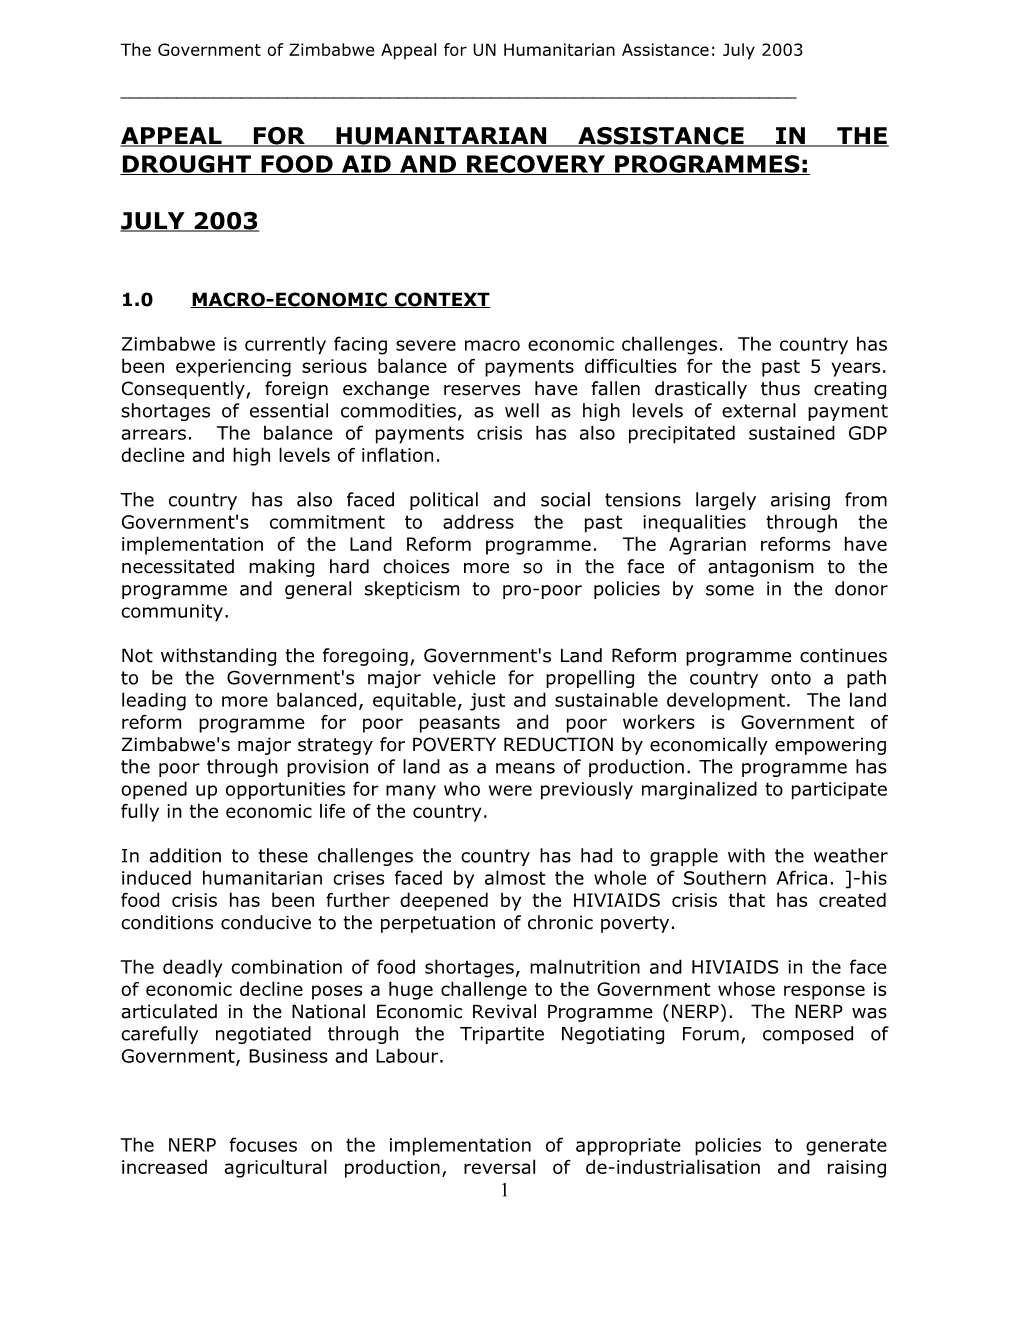 Appeal for Humanitarian Assistance in the Drought Food Aid and Recovery Programmes